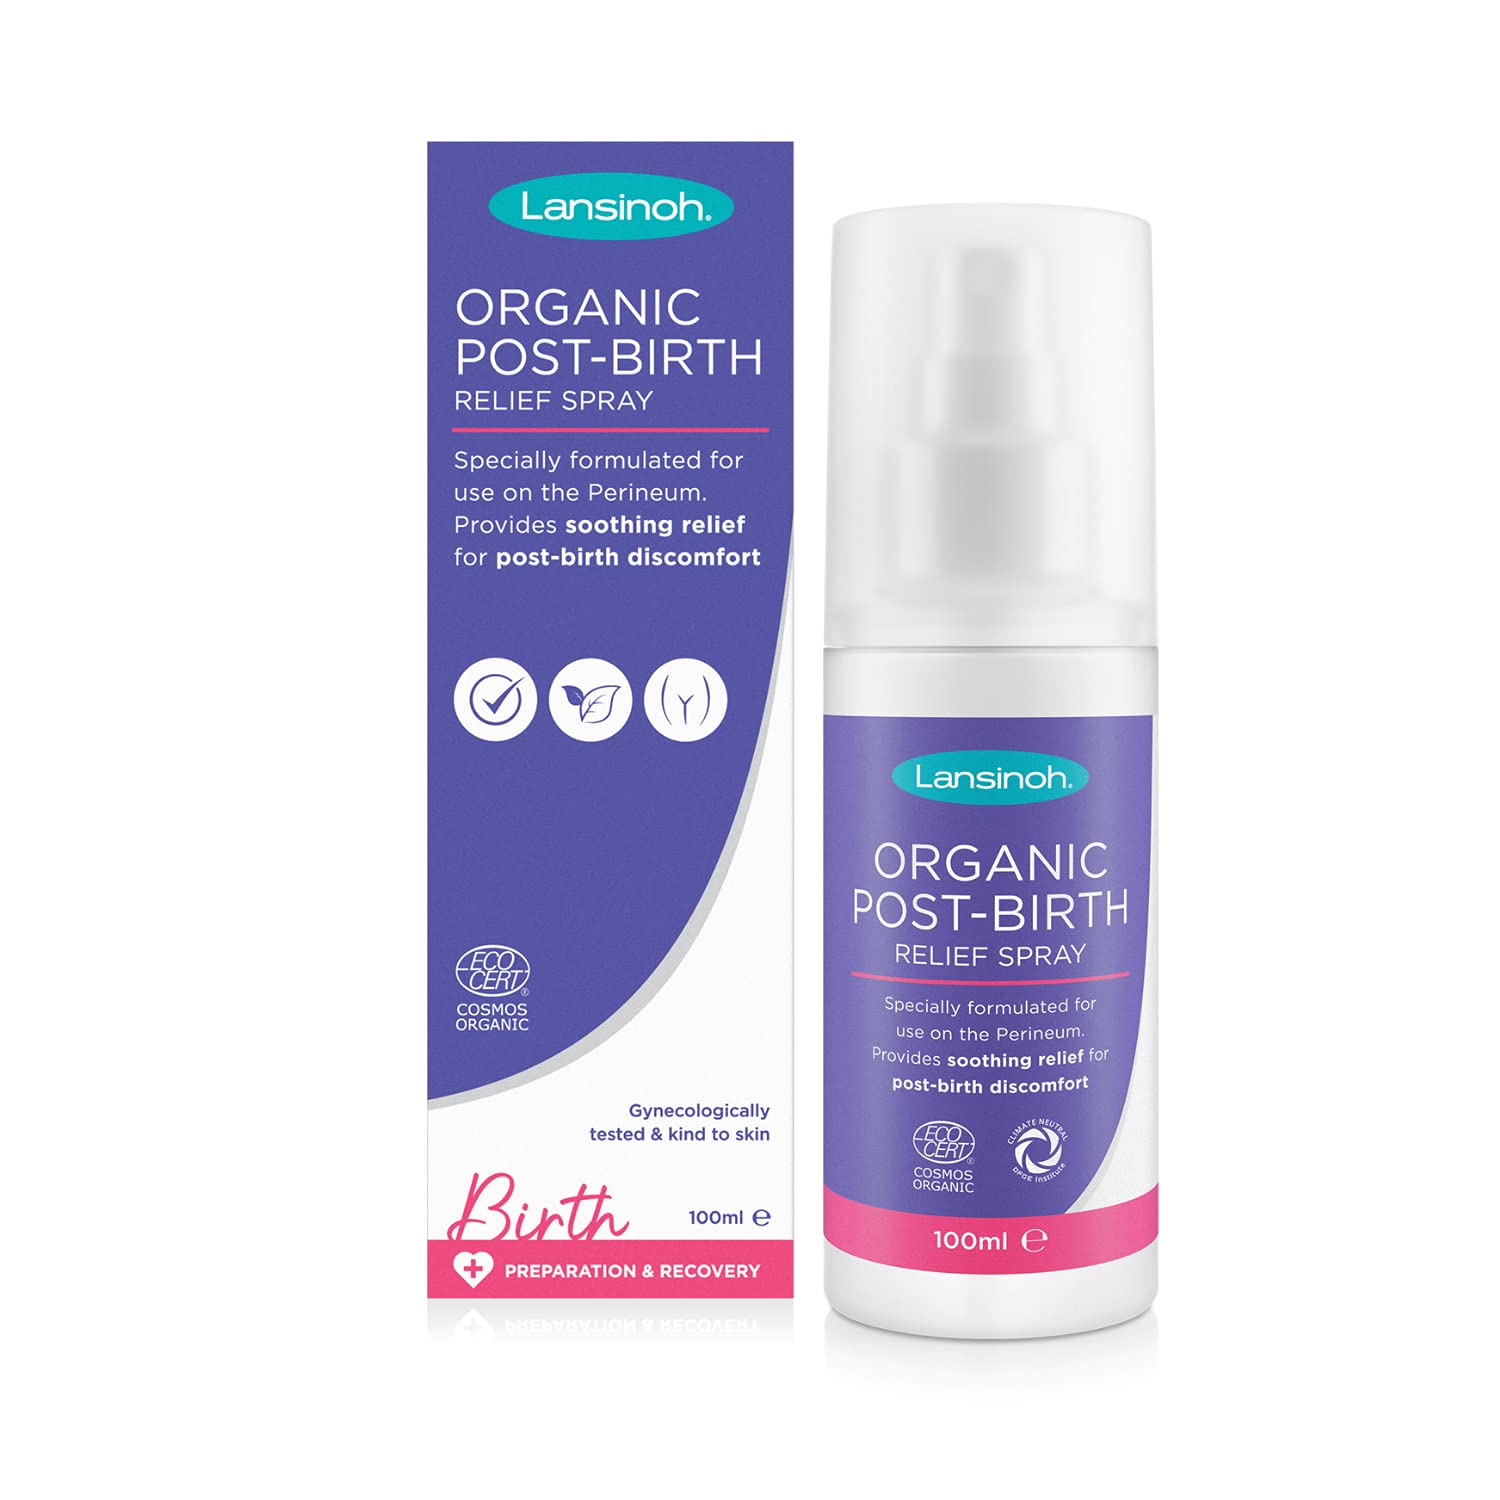 Lansinoh Organic Post-Birth Relief Spray - 100ml Spray Bottle Postnatal Relief Spray for Recovery Natural Ingredients Soothing Formula to Soothe After Birth, Clear, (Pack of 1)